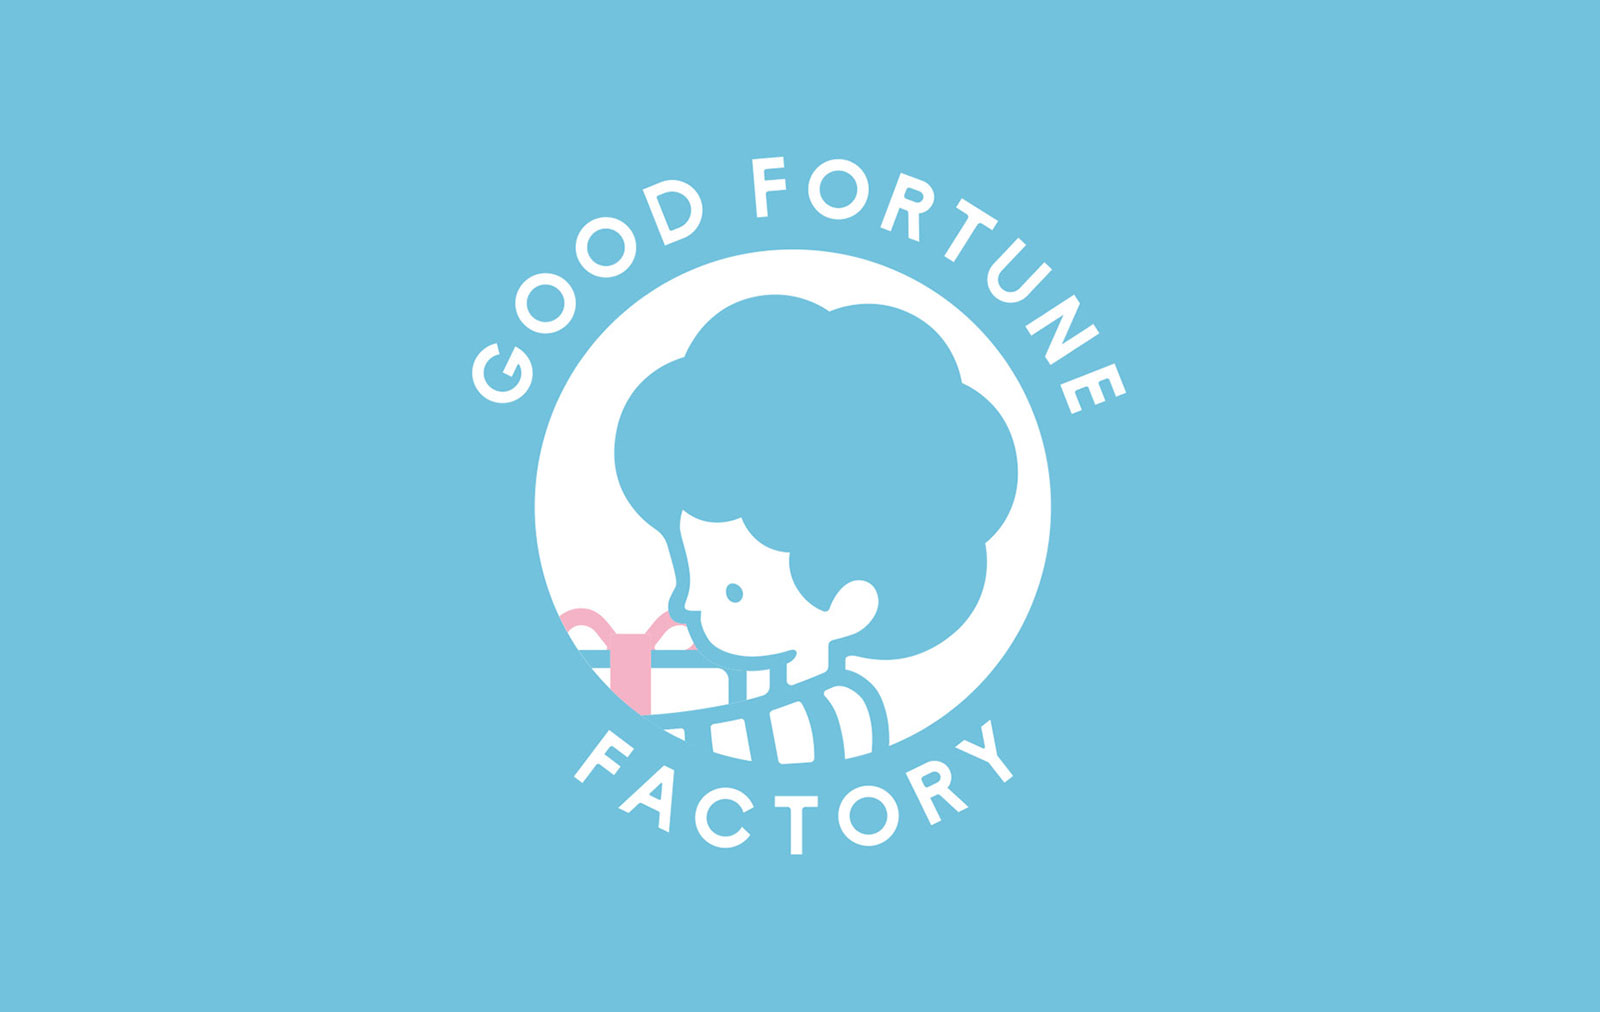 GOOD FORTUNE FACTORY